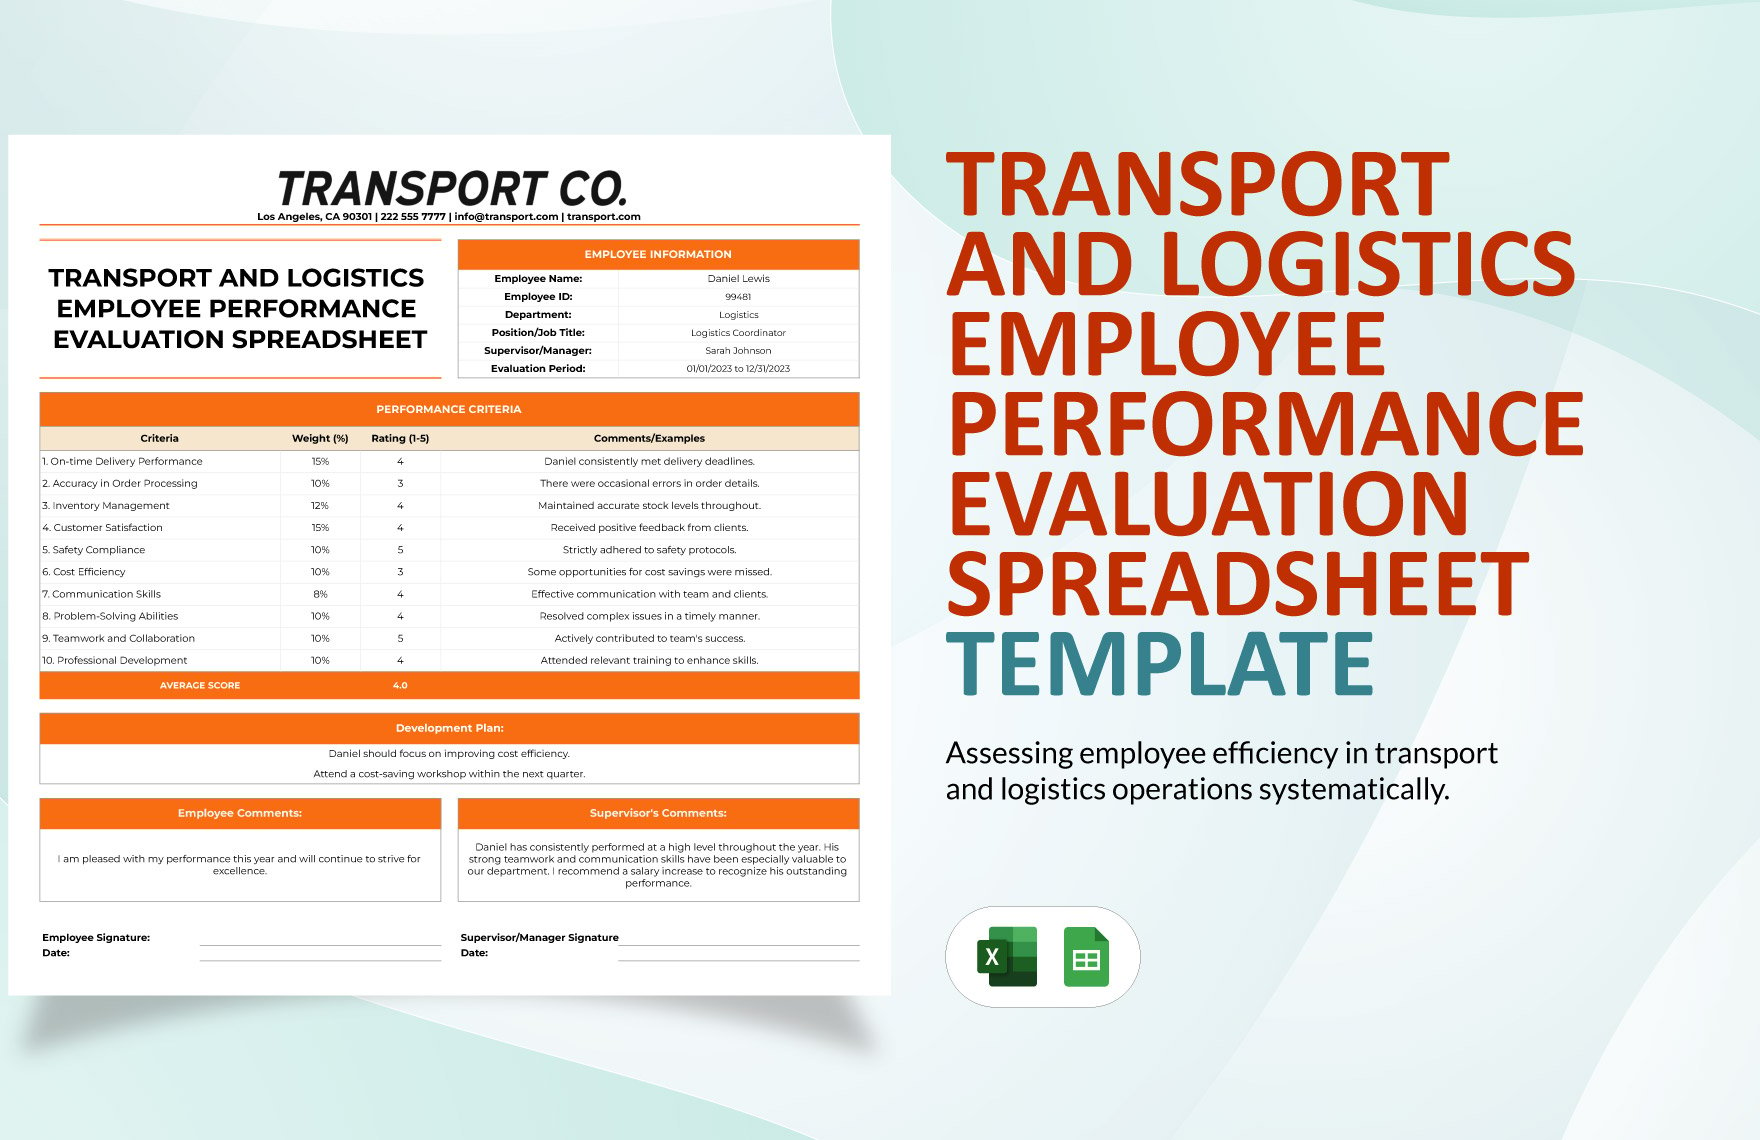 Free Transport and Logistics Employee Performance Evaluation Spreadsheet Template in Excel, Google Sheets